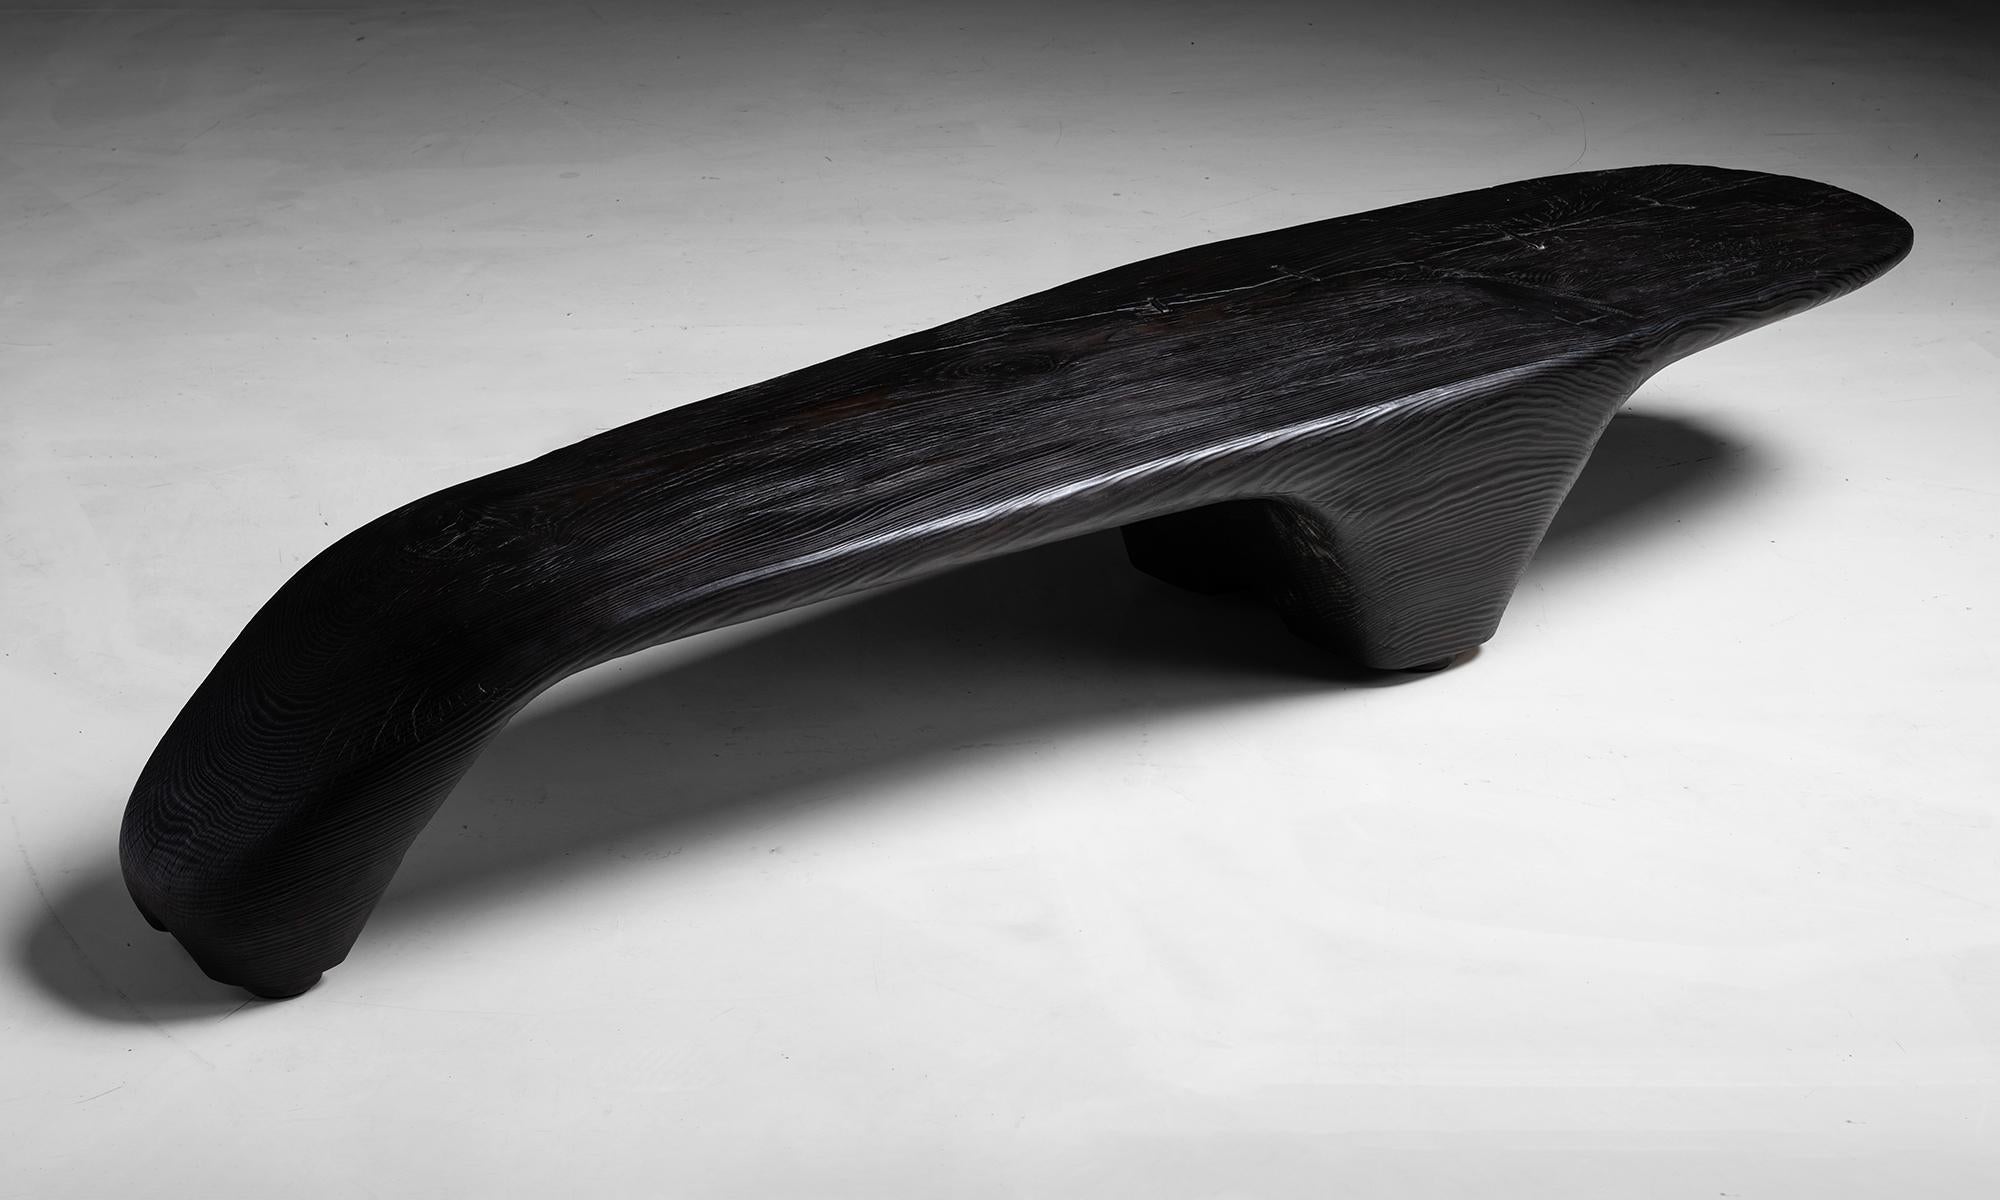 Burnt Wood Bench / Coffee Table

Made in Wales

Black Pine Sugi Ban Sculptural Bench / Coffee Table.

Measures 78.5”L x 18.5”d x 12.5”h